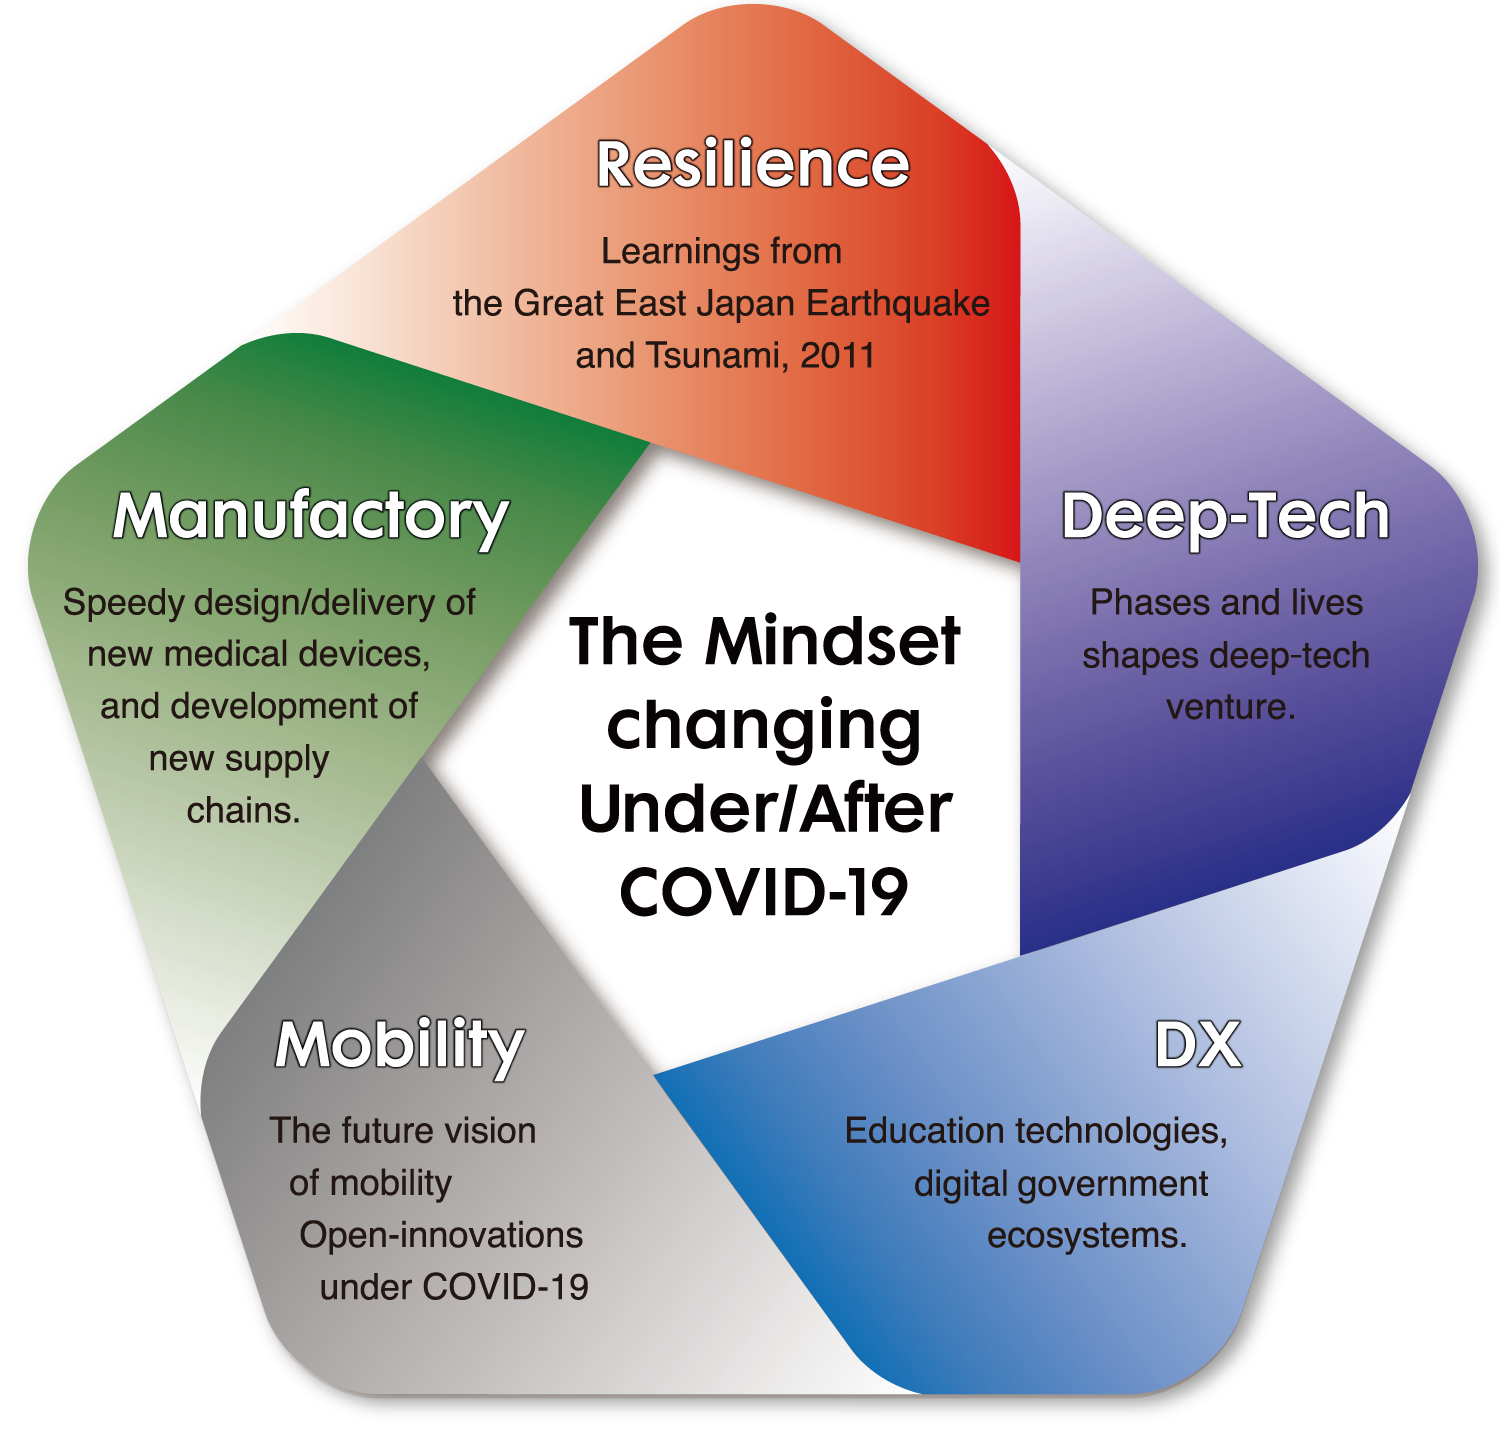 The Mindset changing Under/After COVID-19